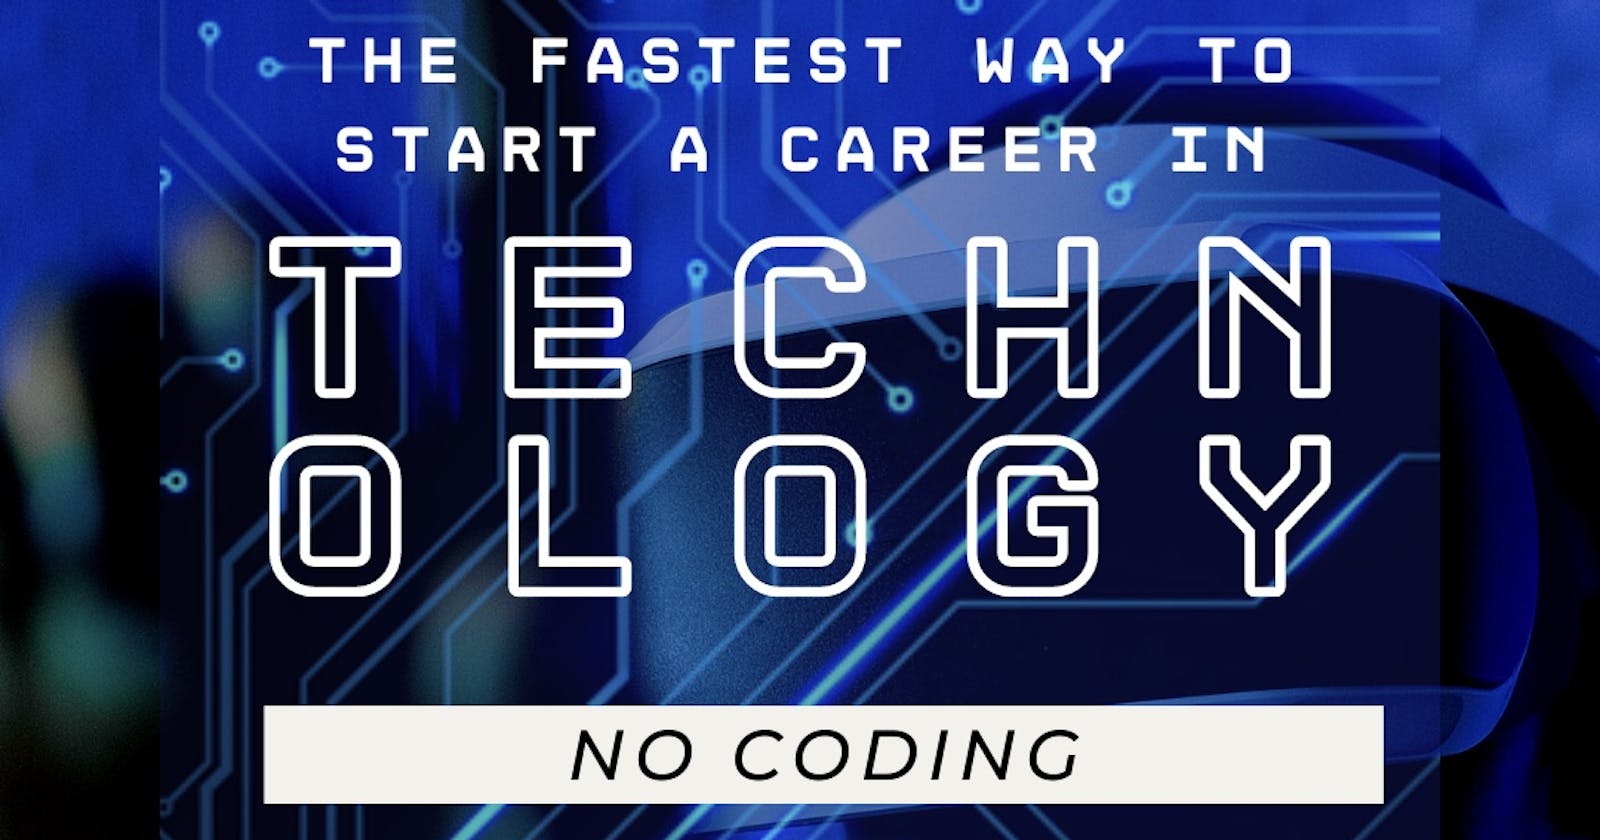 Starting a Career in Tech Industry Without Coding: The fastest Way